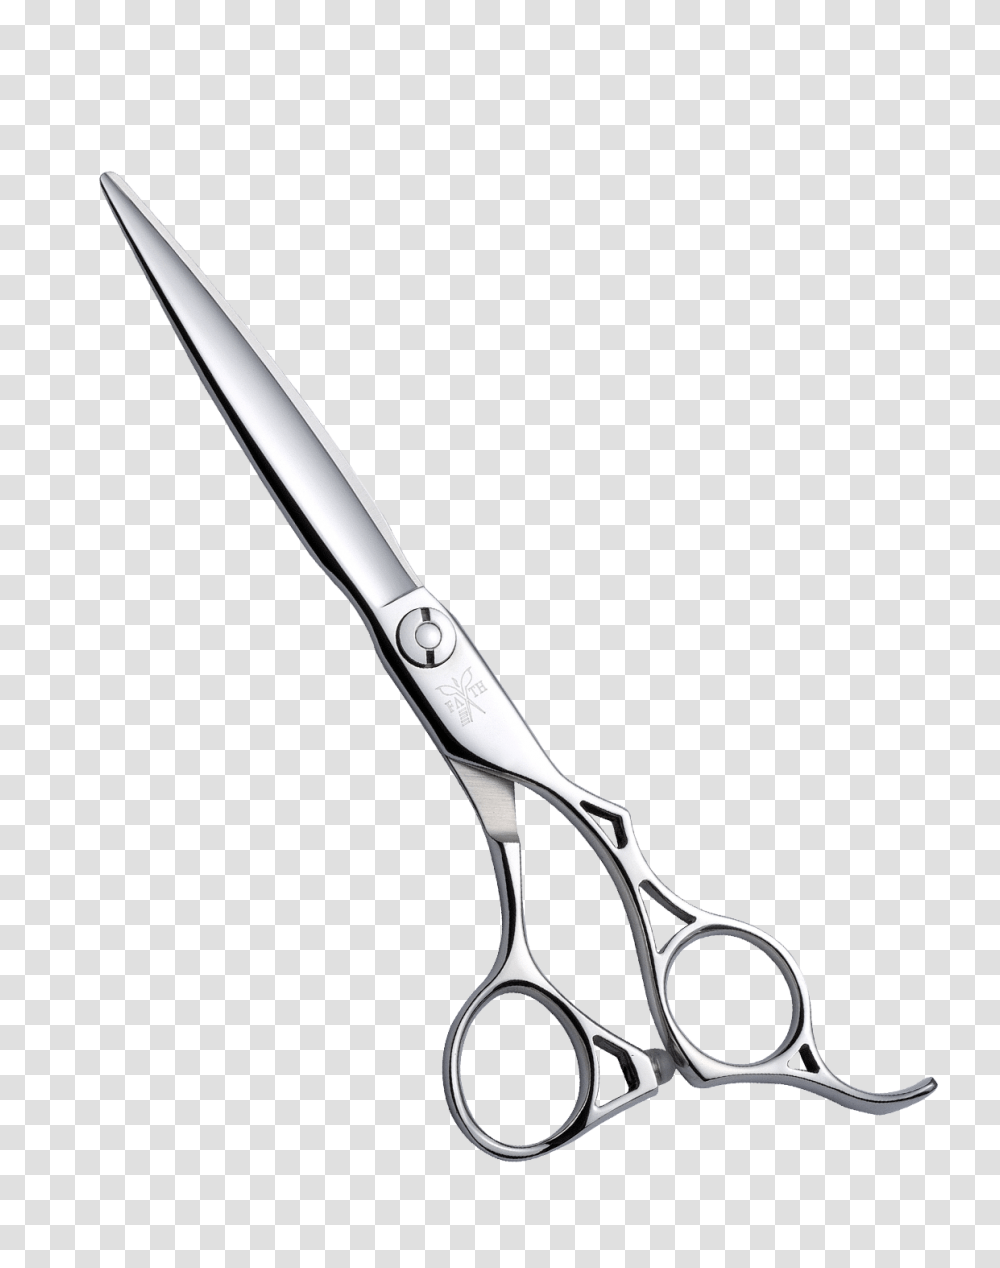 Shears Hd Shears Hd Images, Weapon, Weaponry, Blade, Scissors Transparent Png